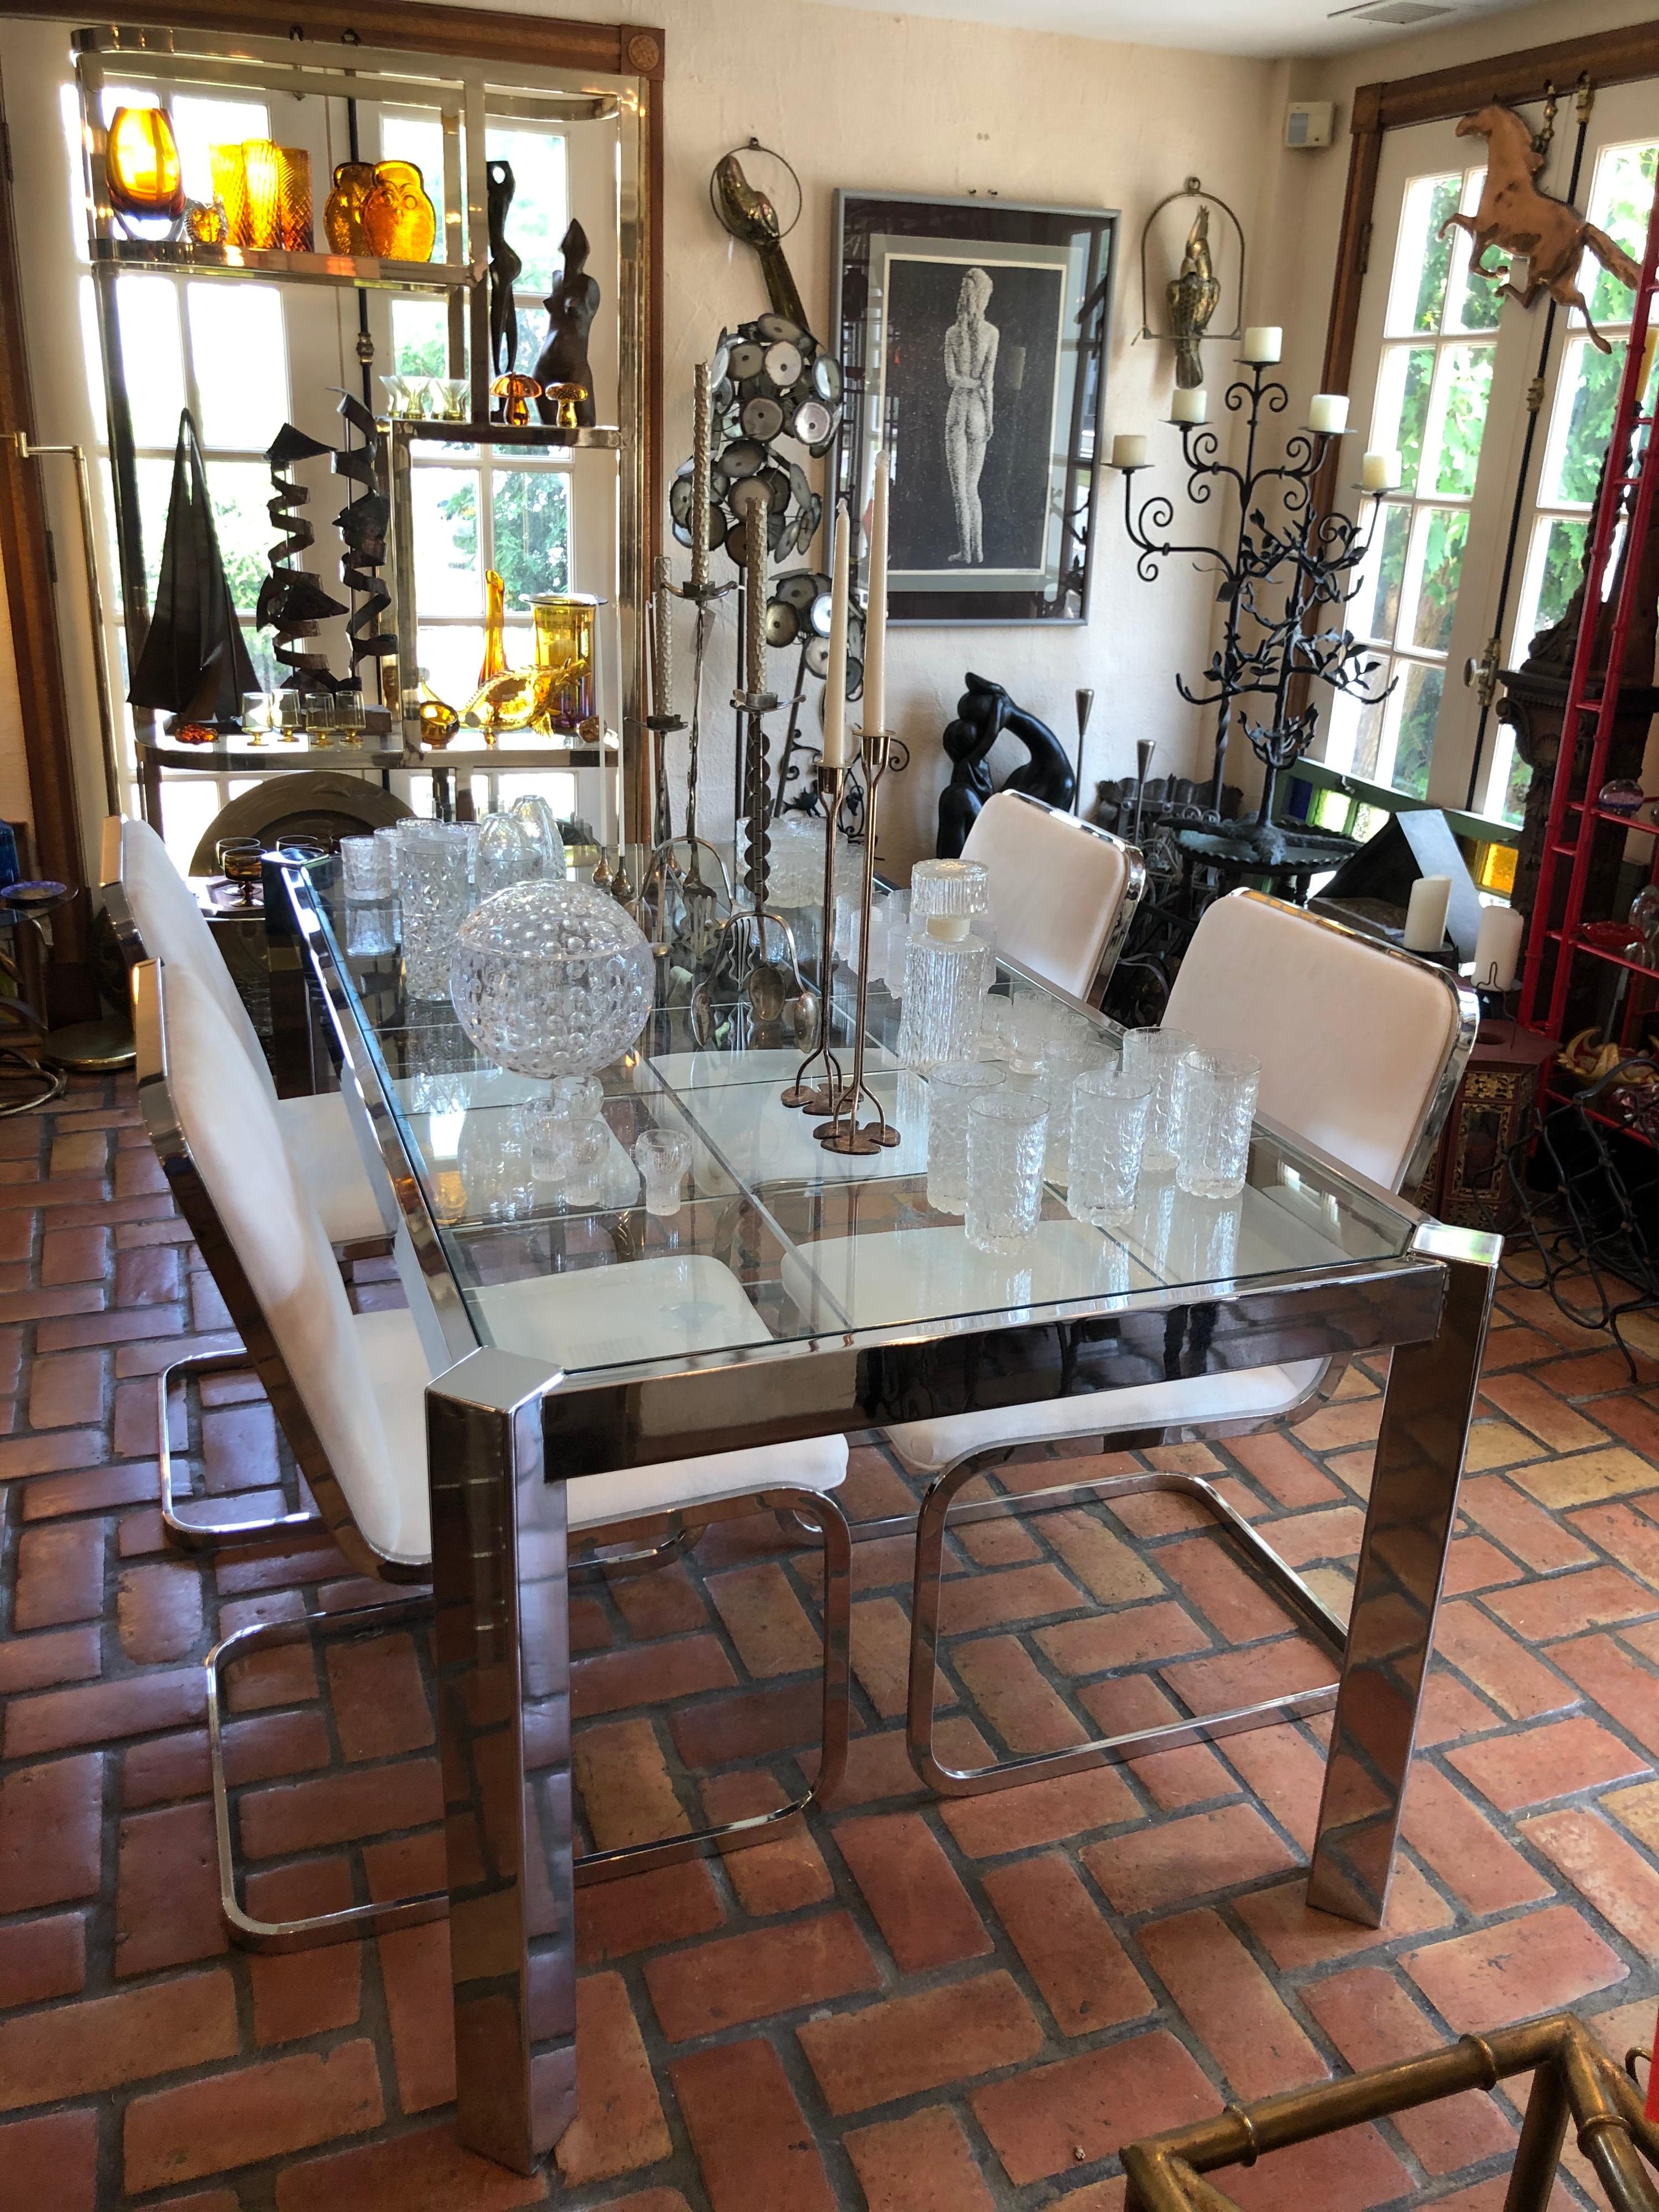 Design Institute of America (DIA) chrome and glass dining table. Mint condition. The epitome of high end chic. Sleek Parsons lines make up this table with its faceted, incised and grid patterned glass top. Canted legs make this an unusual design